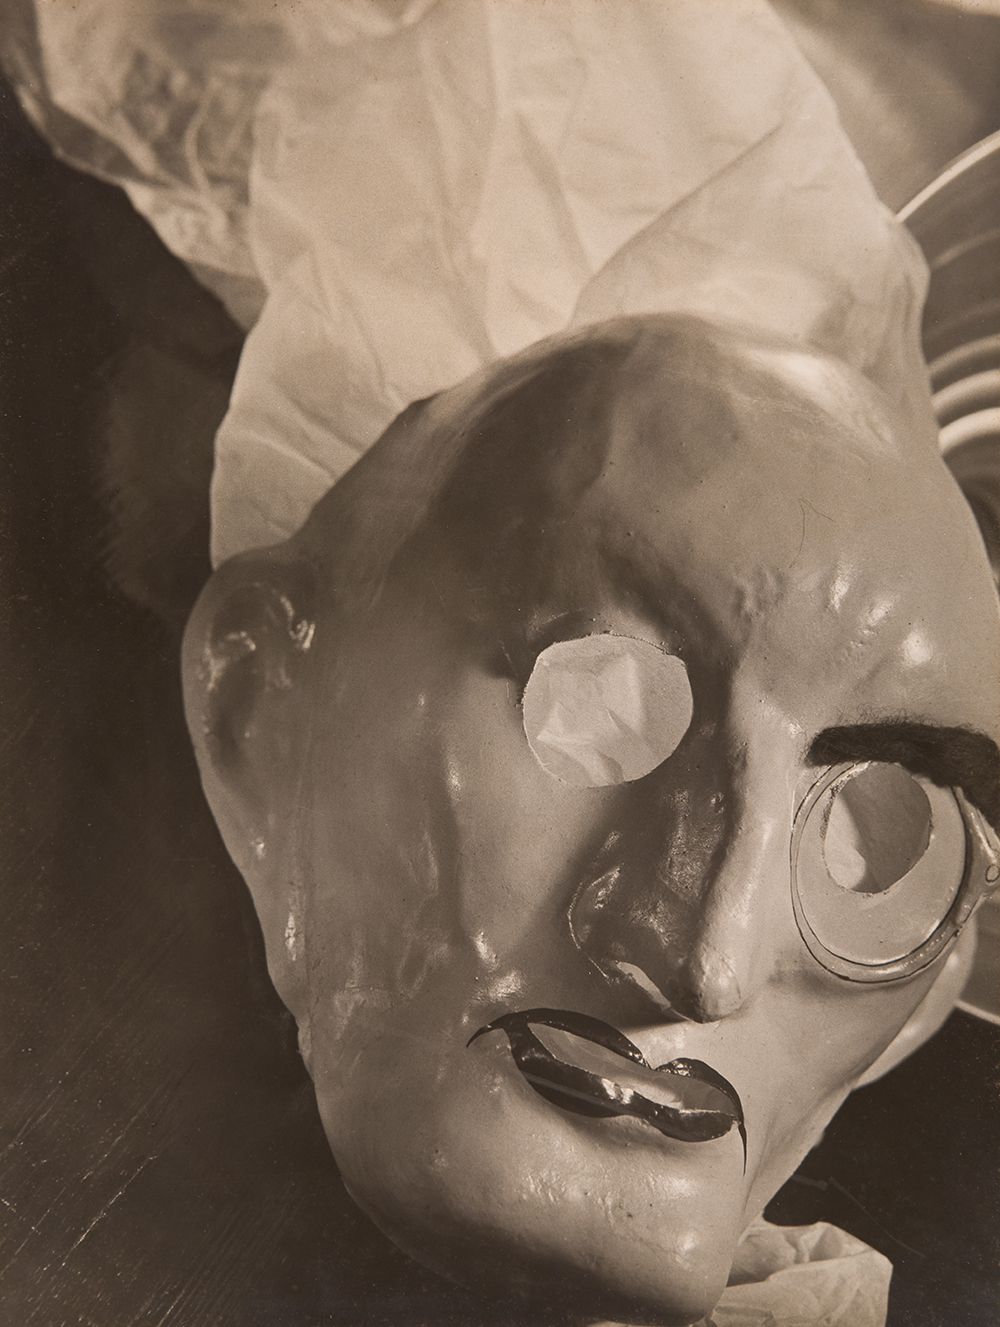 a black and white photograph of a realistic mask sits atop some tissue paper. The mask is of a bald man with a monocle on his left eye. His lips are outlined in a darker paint. 